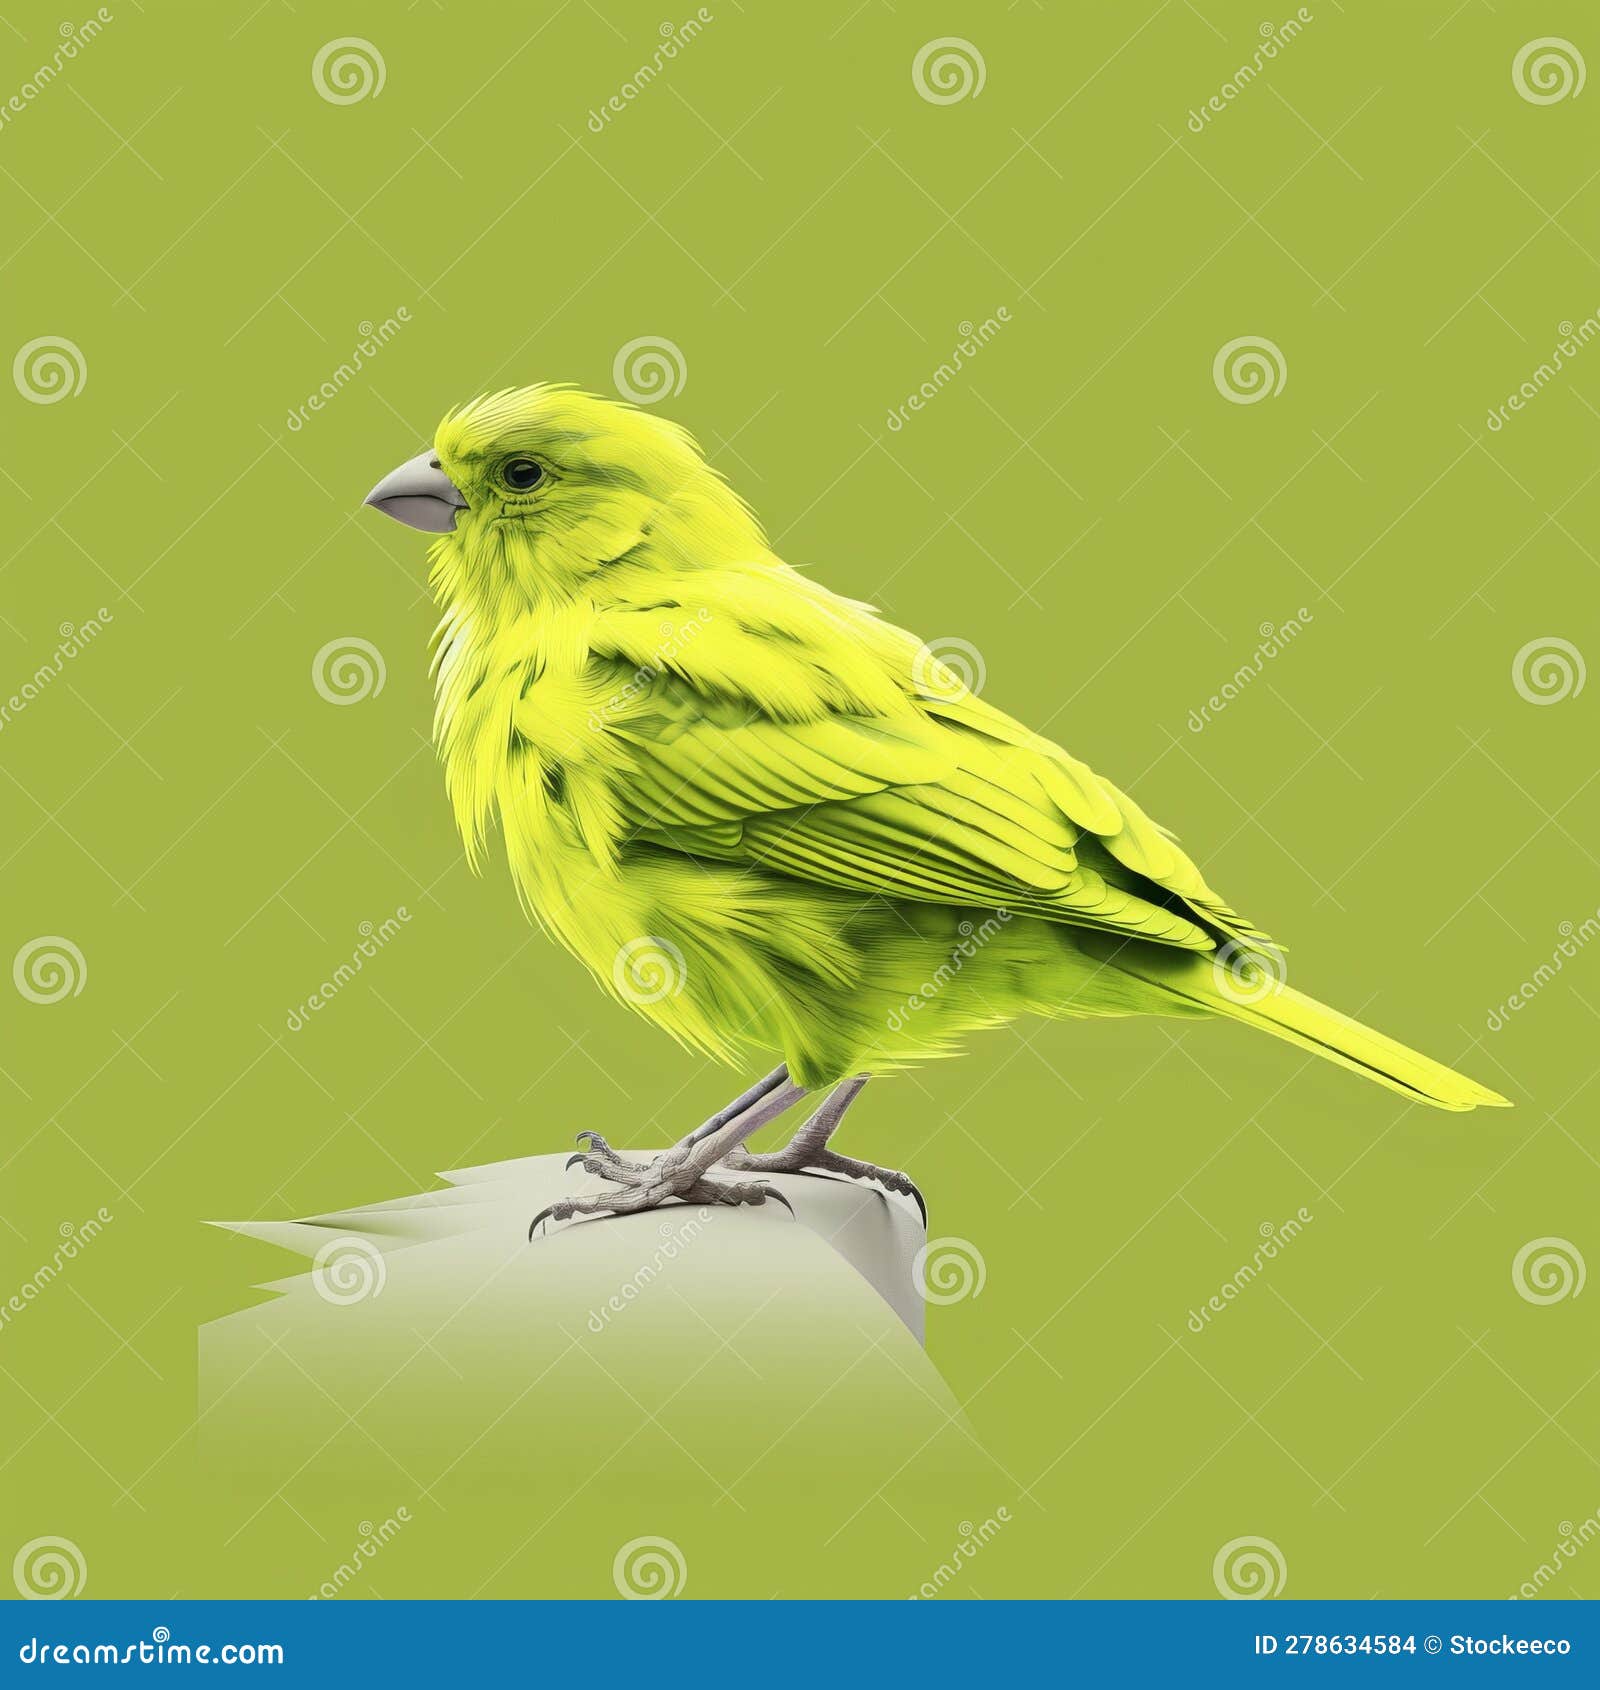 100000 Canary Vector Images  Depositphotos